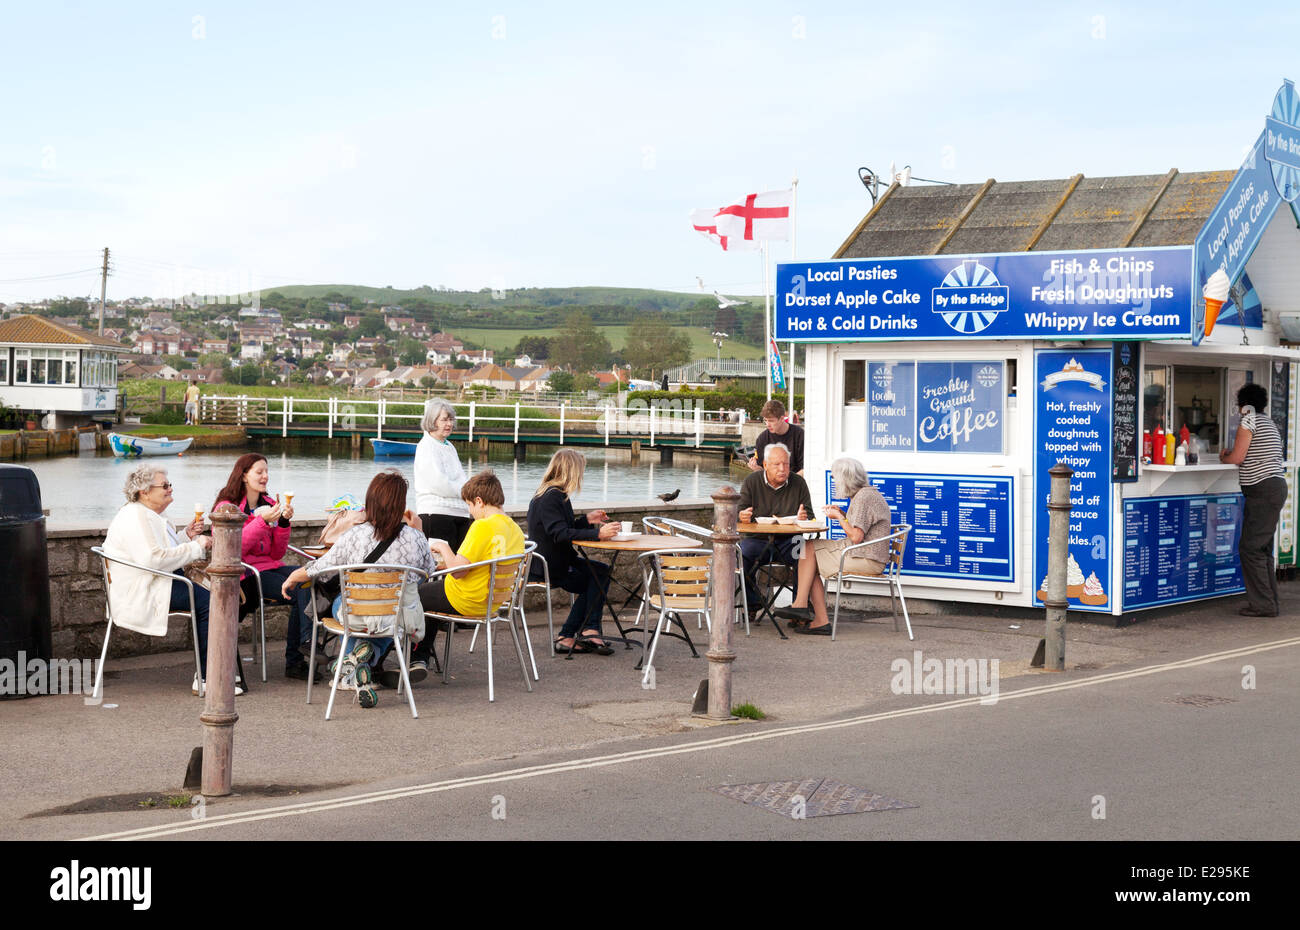 People eating fish and chips at a fish and chip shop, West Bay, Bridport Harbour, Dorset coast, England UK Stock Photo